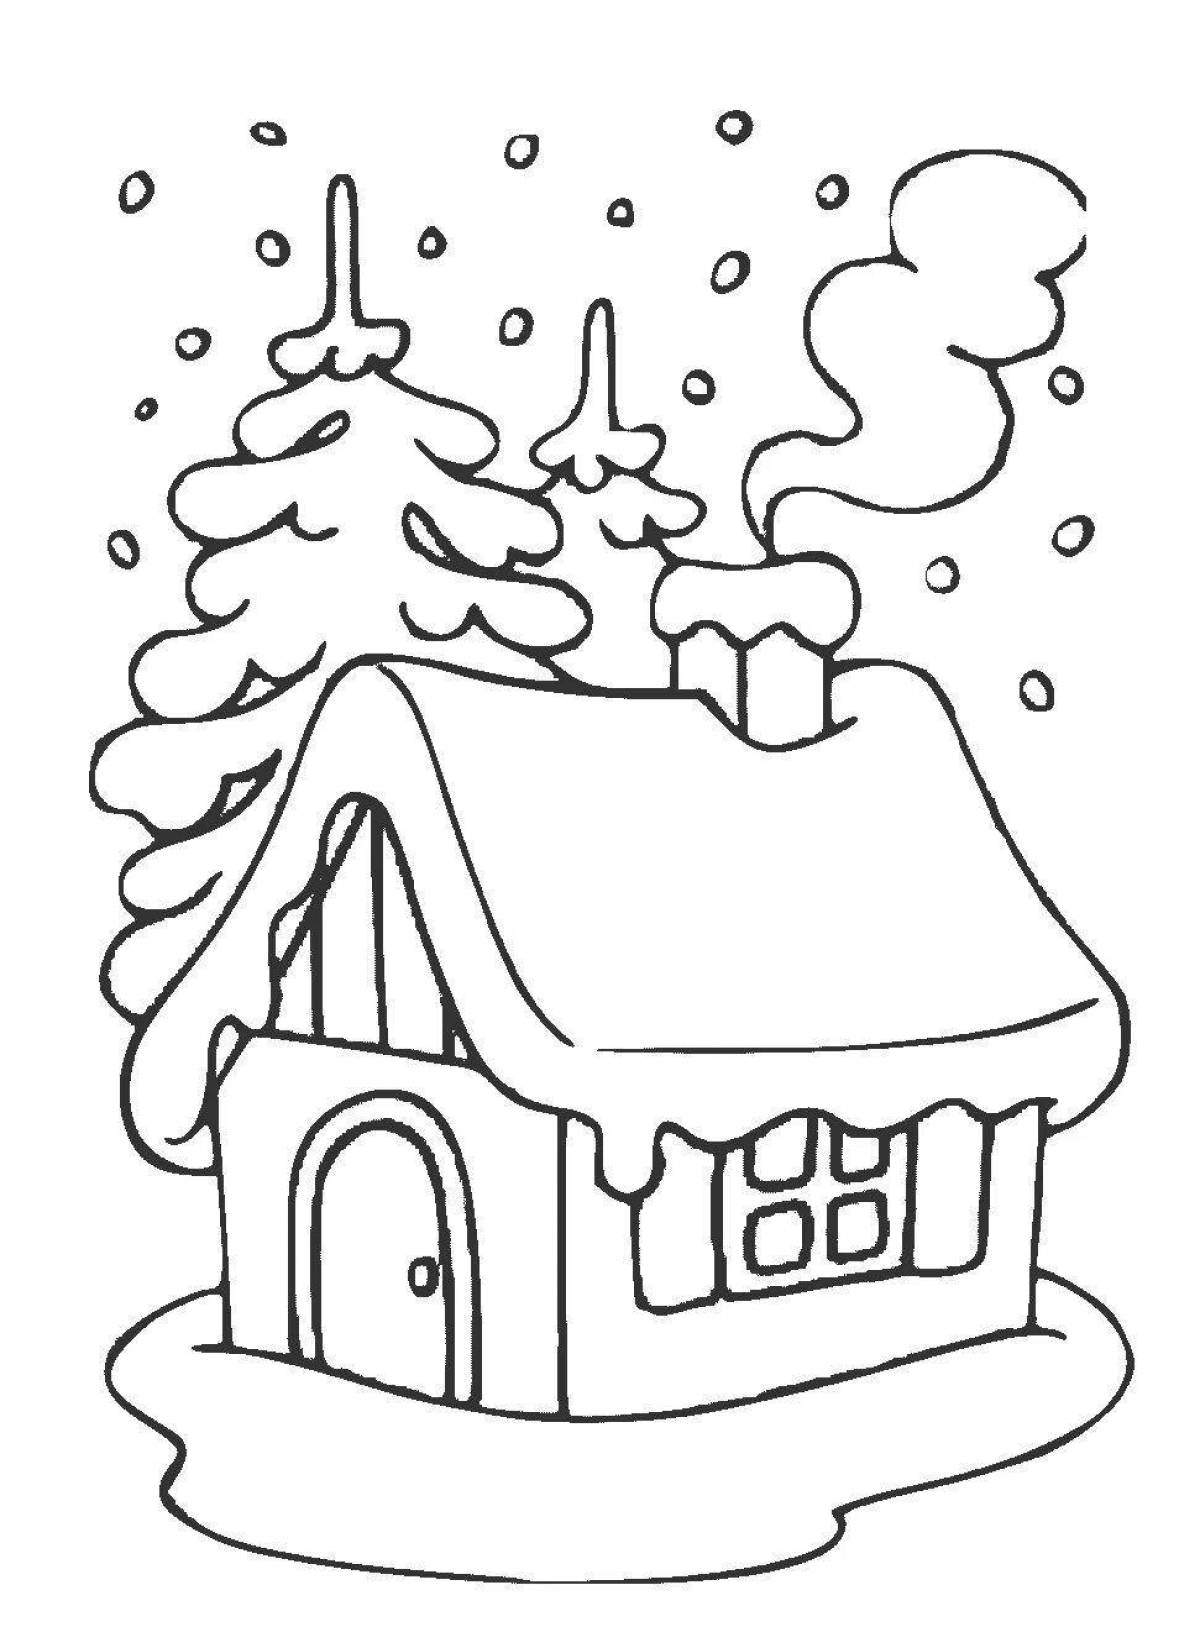 Adorable Christmas stencils for coloring